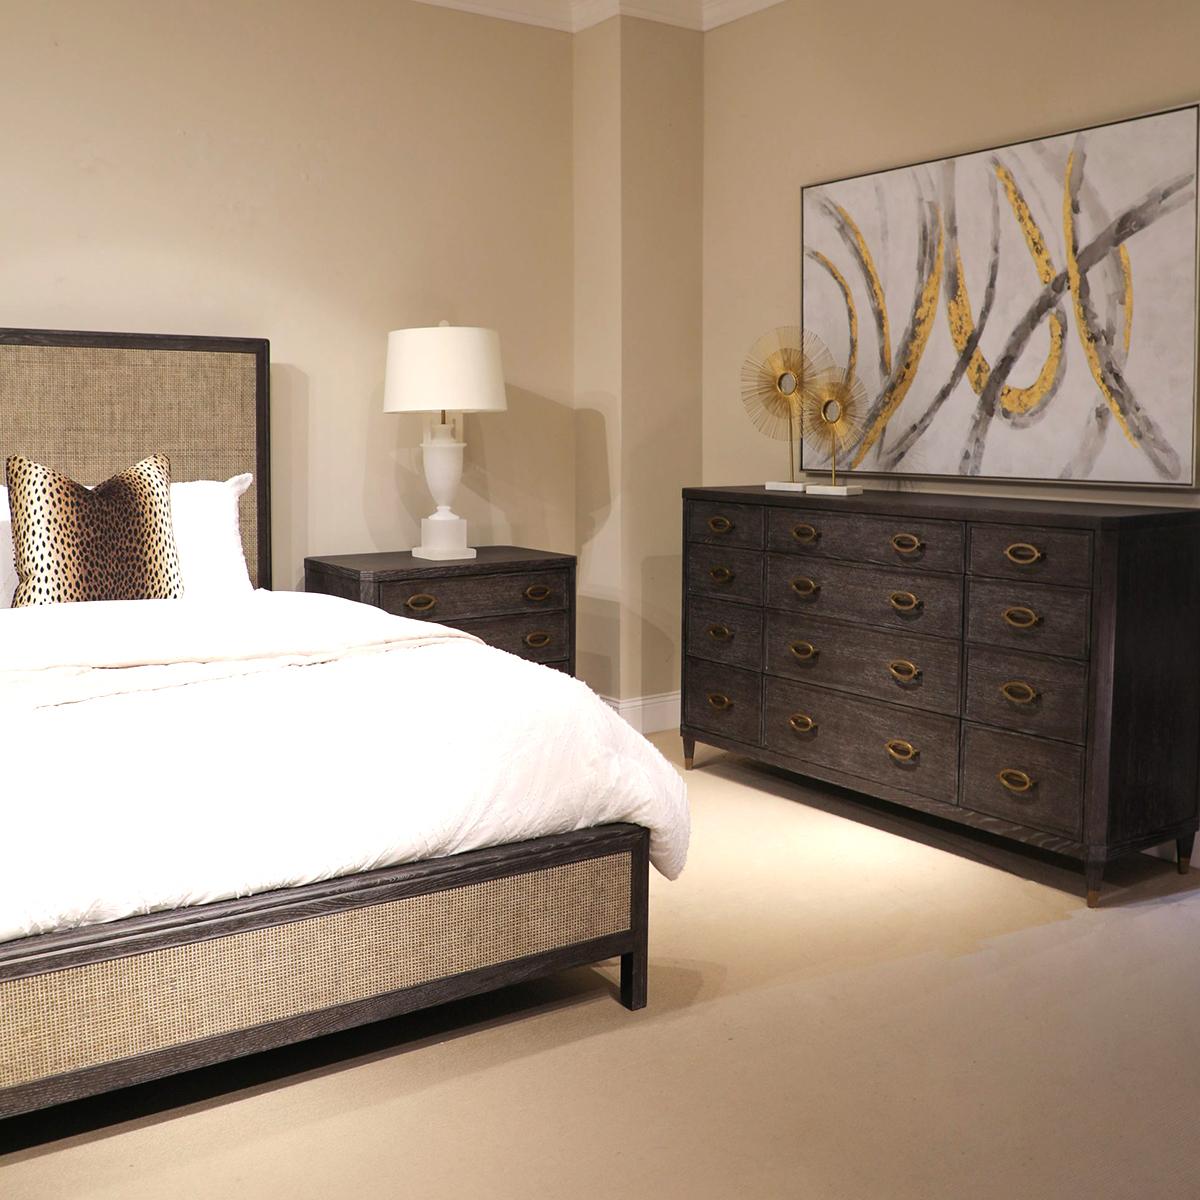 Midnight Modern Bed with a dark cerused finish to the frame. A classic design with an updated look. The headboard, footboard, and rails are all inset with a natural weaved caning.

Dimensions: 81.25